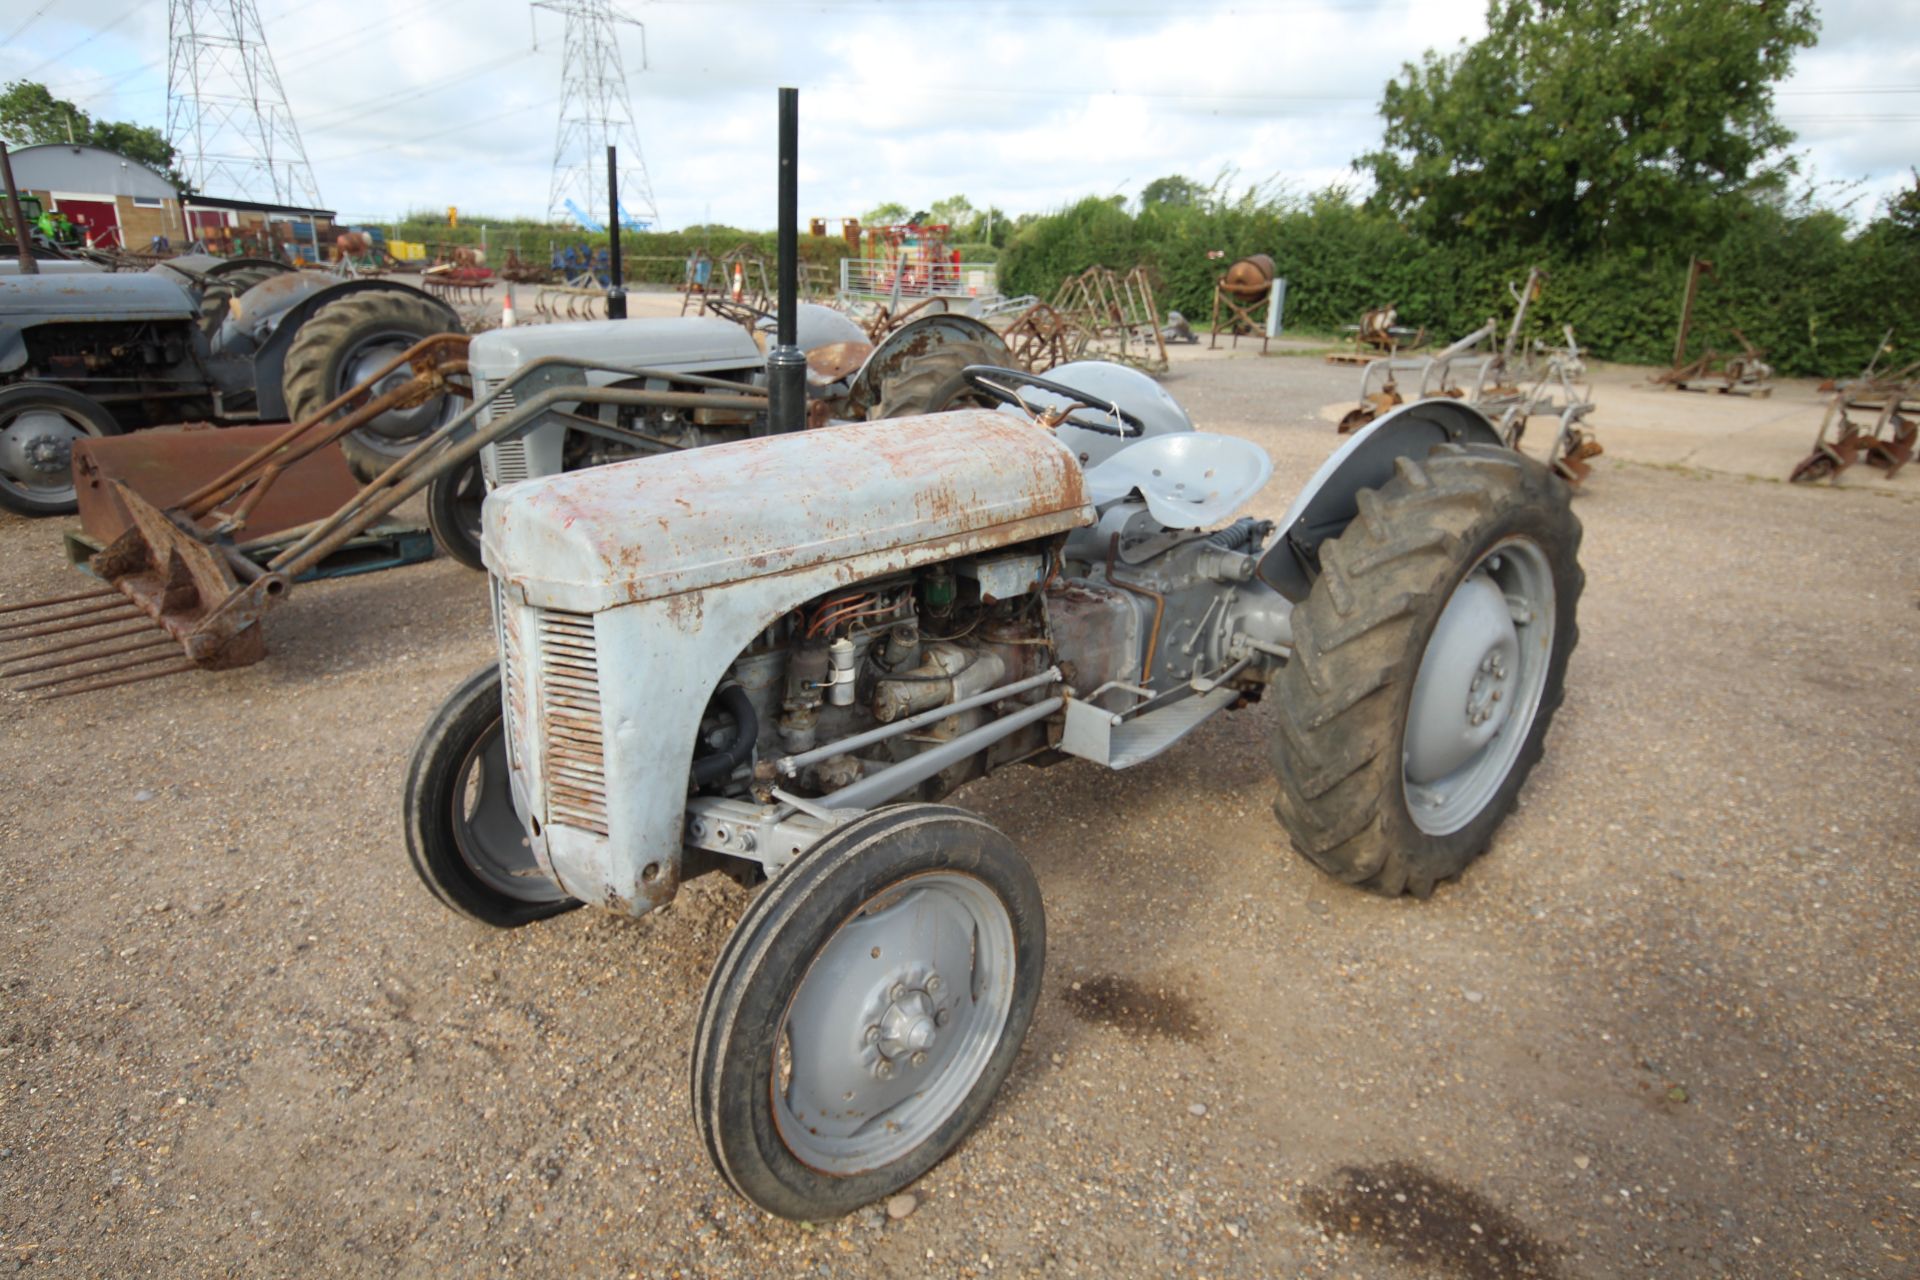 Ferguson TED 20 petrol/ TVO 2WD tractor. Has not been running recently. Key held.